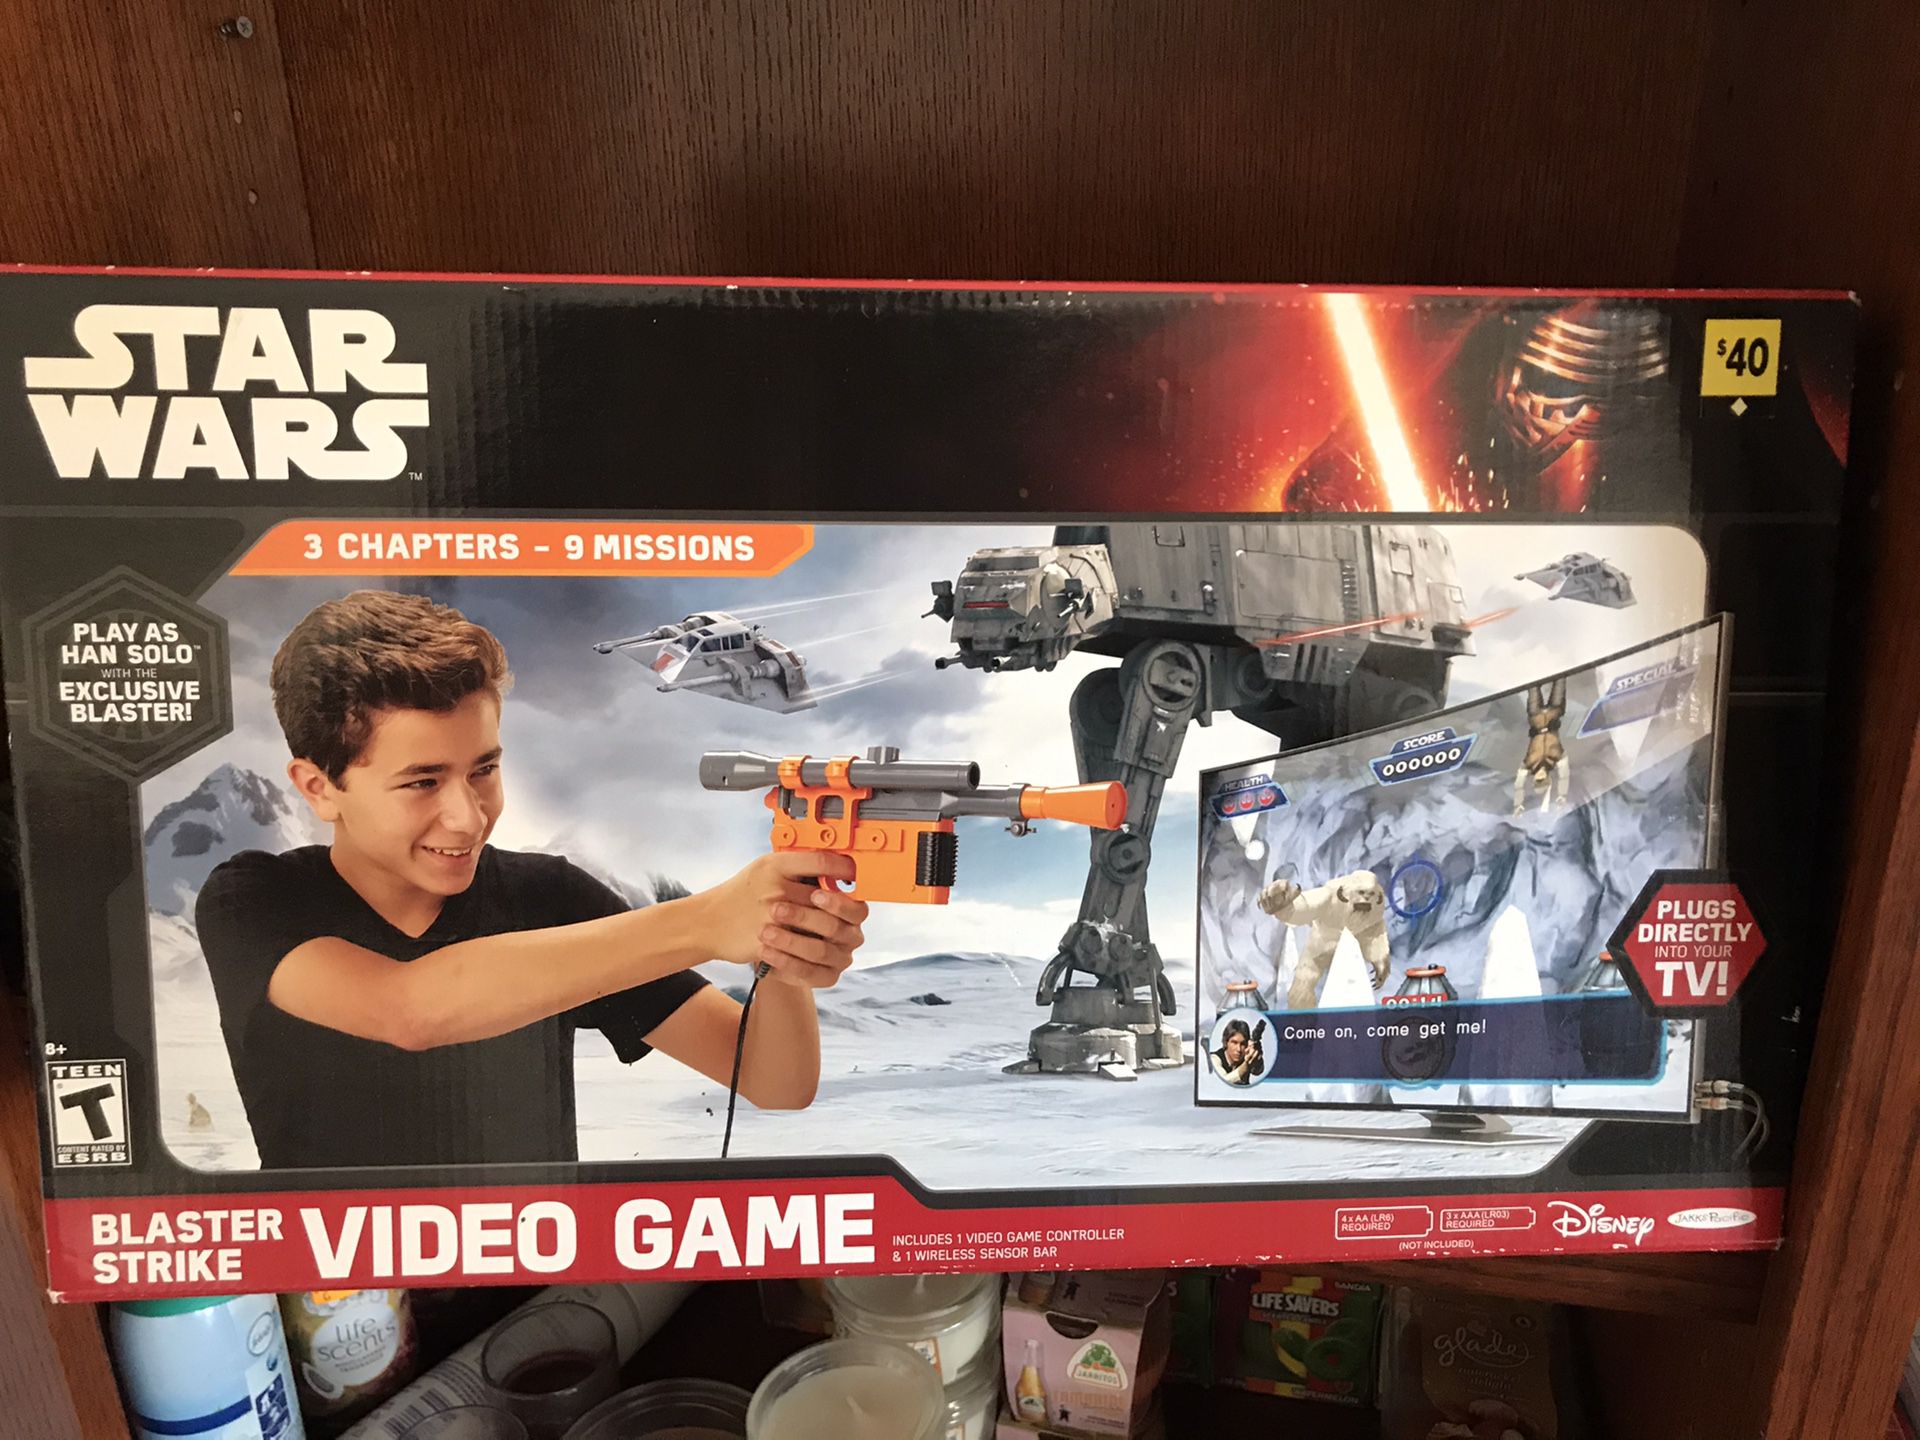 Star Wars toys and puzzles,video game